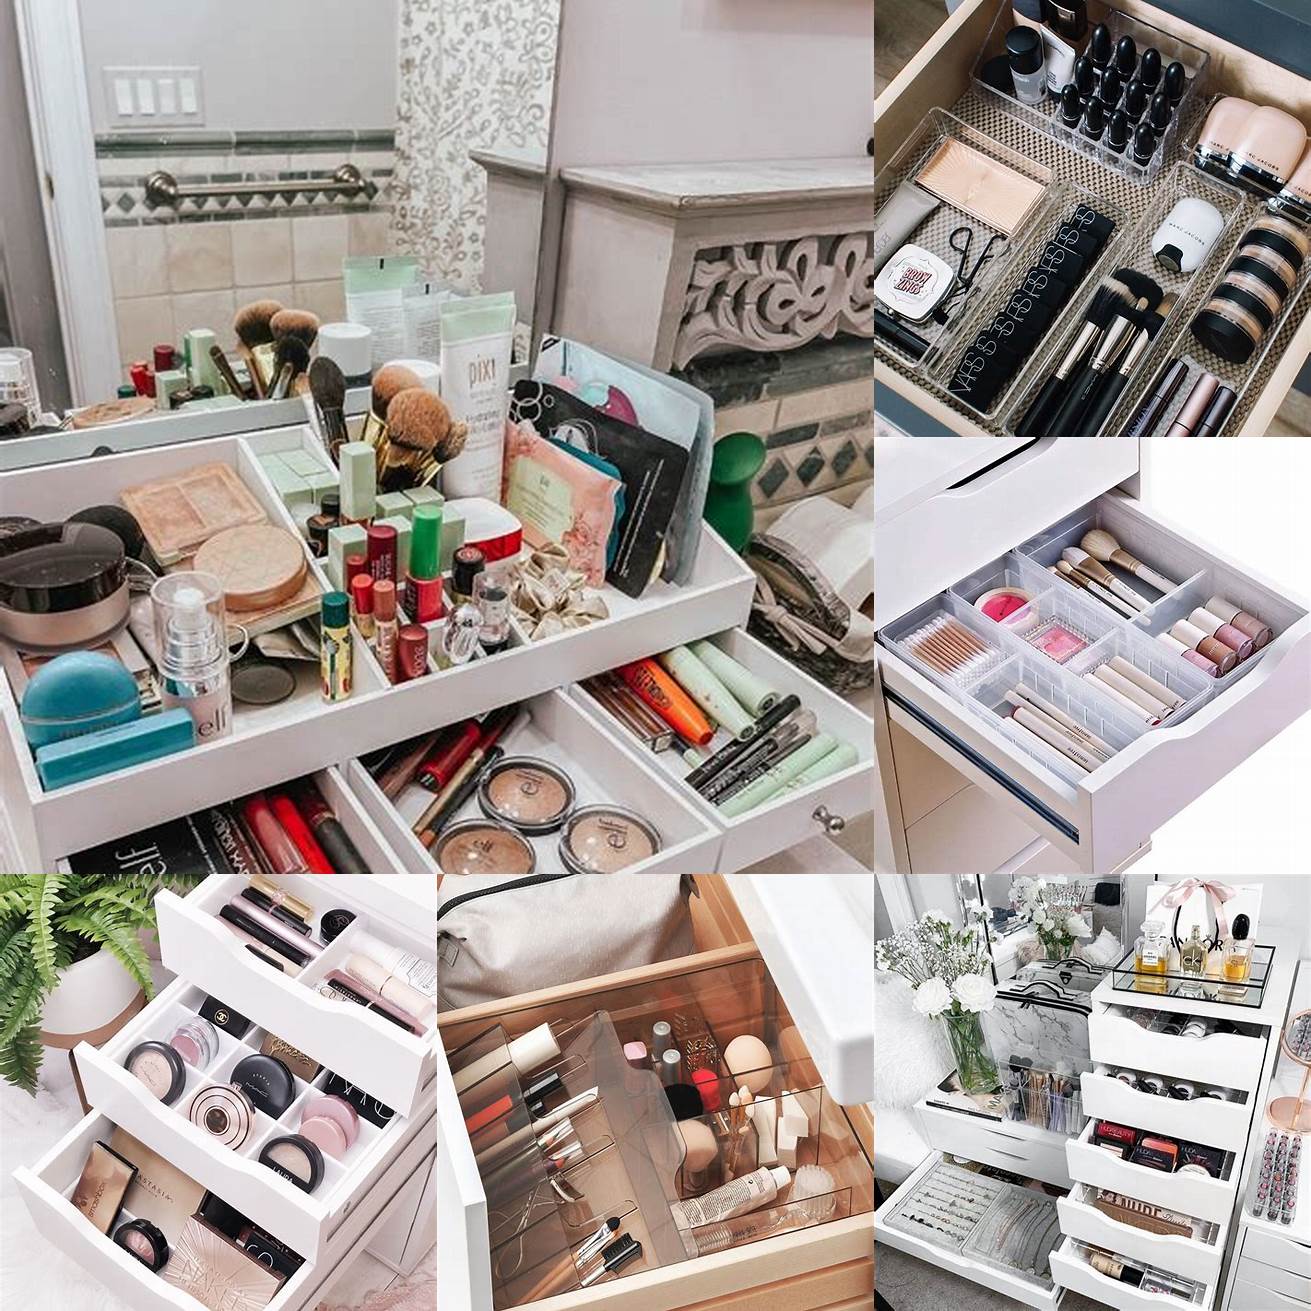 Drawers offer hidden storage and organization for small items like makeup and toiletries